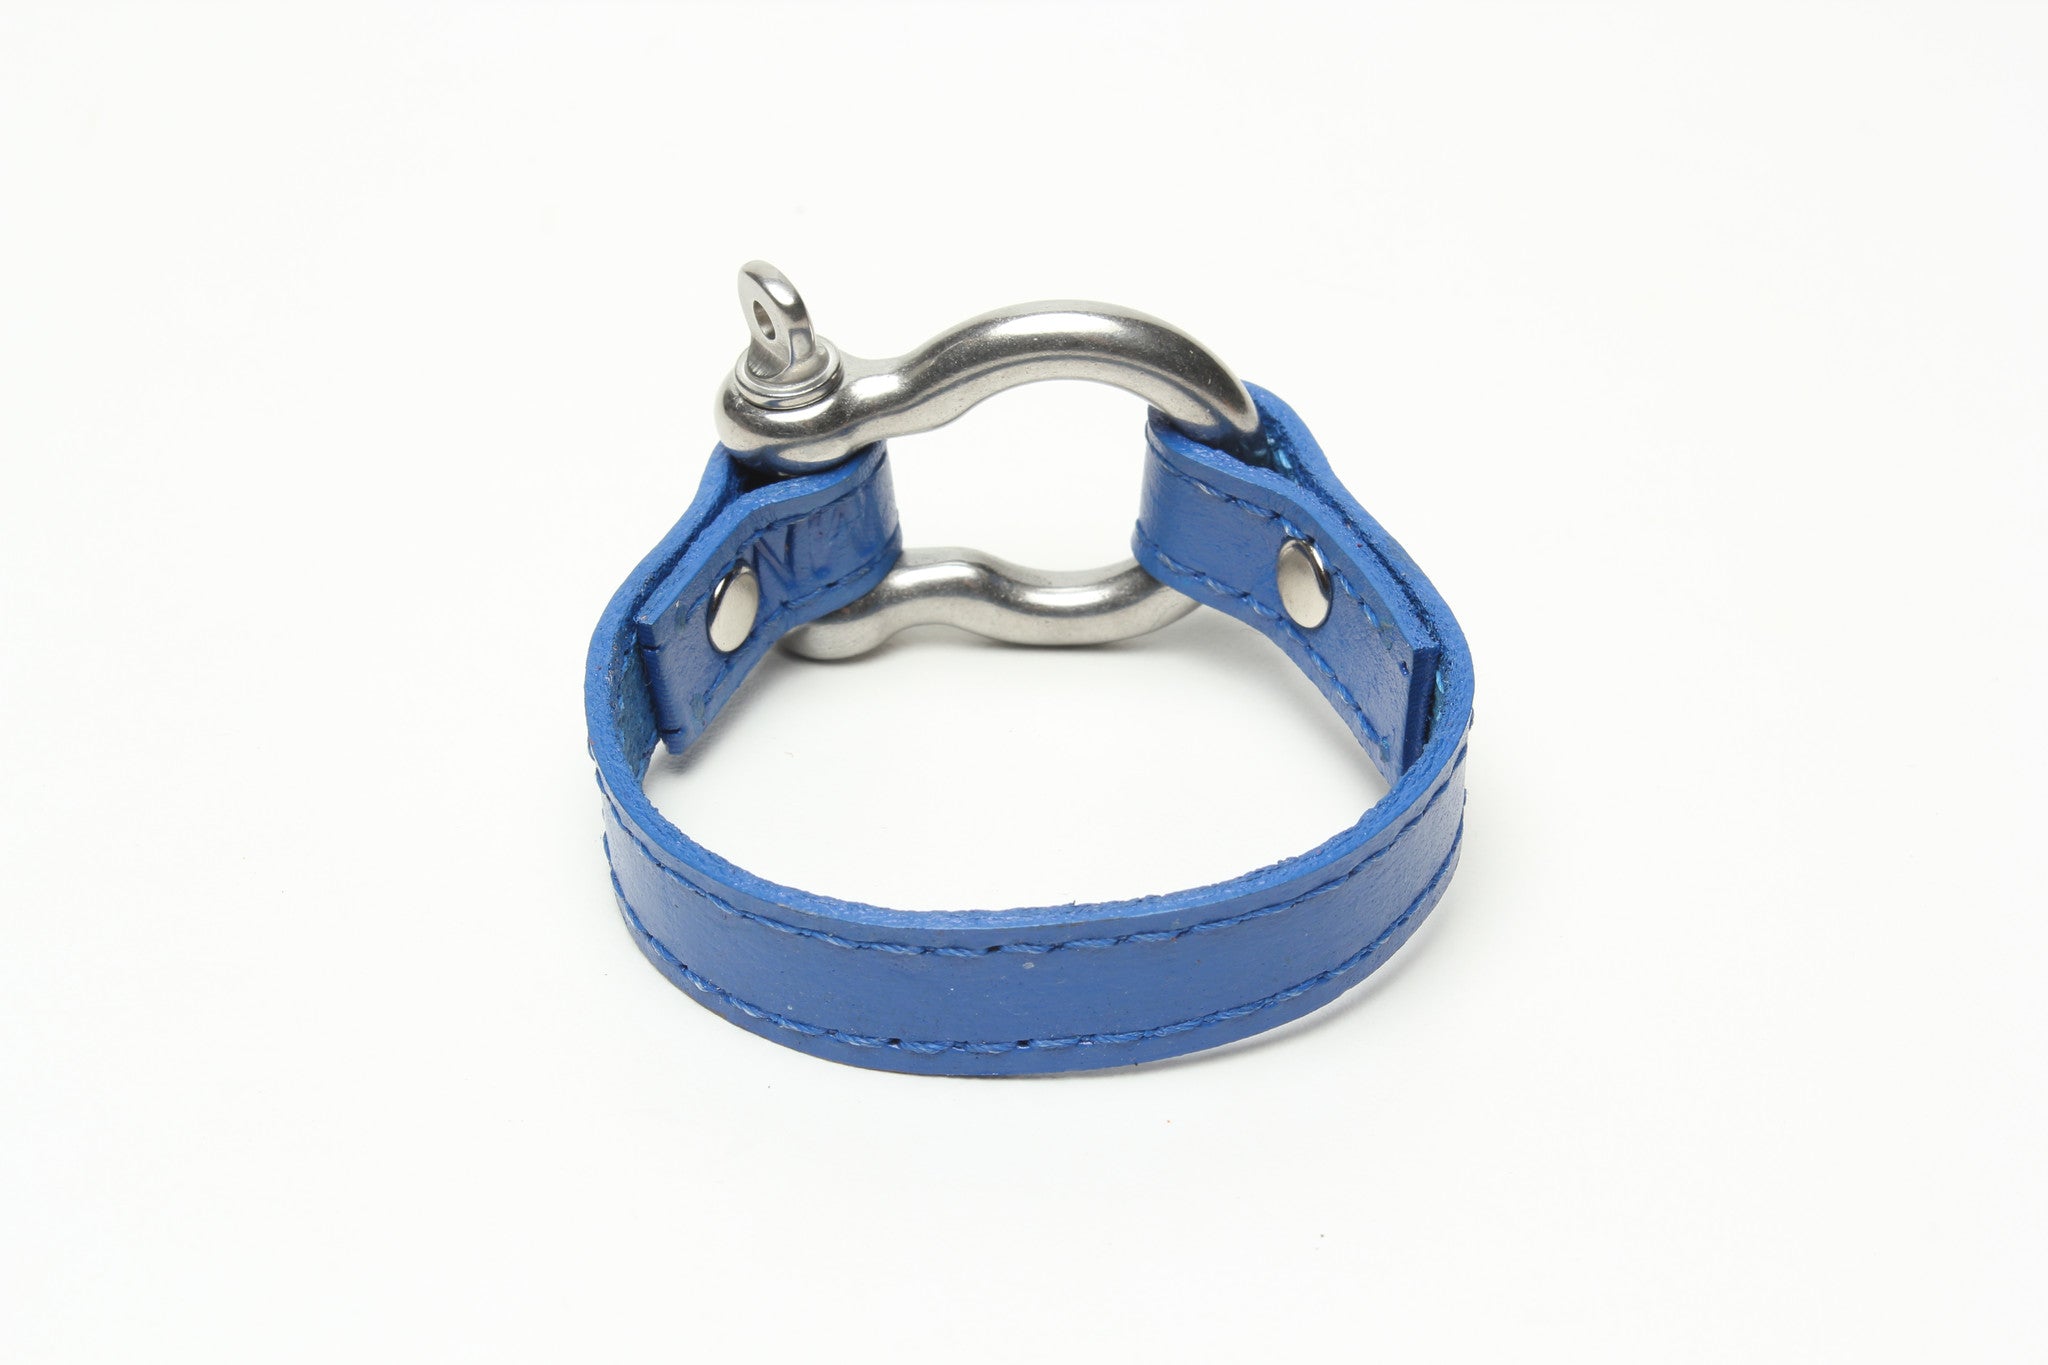 SIGNATURE STITCHED LEATHER AND STAINLESS STEEL SHACKLE BY NYET JEWELRY.